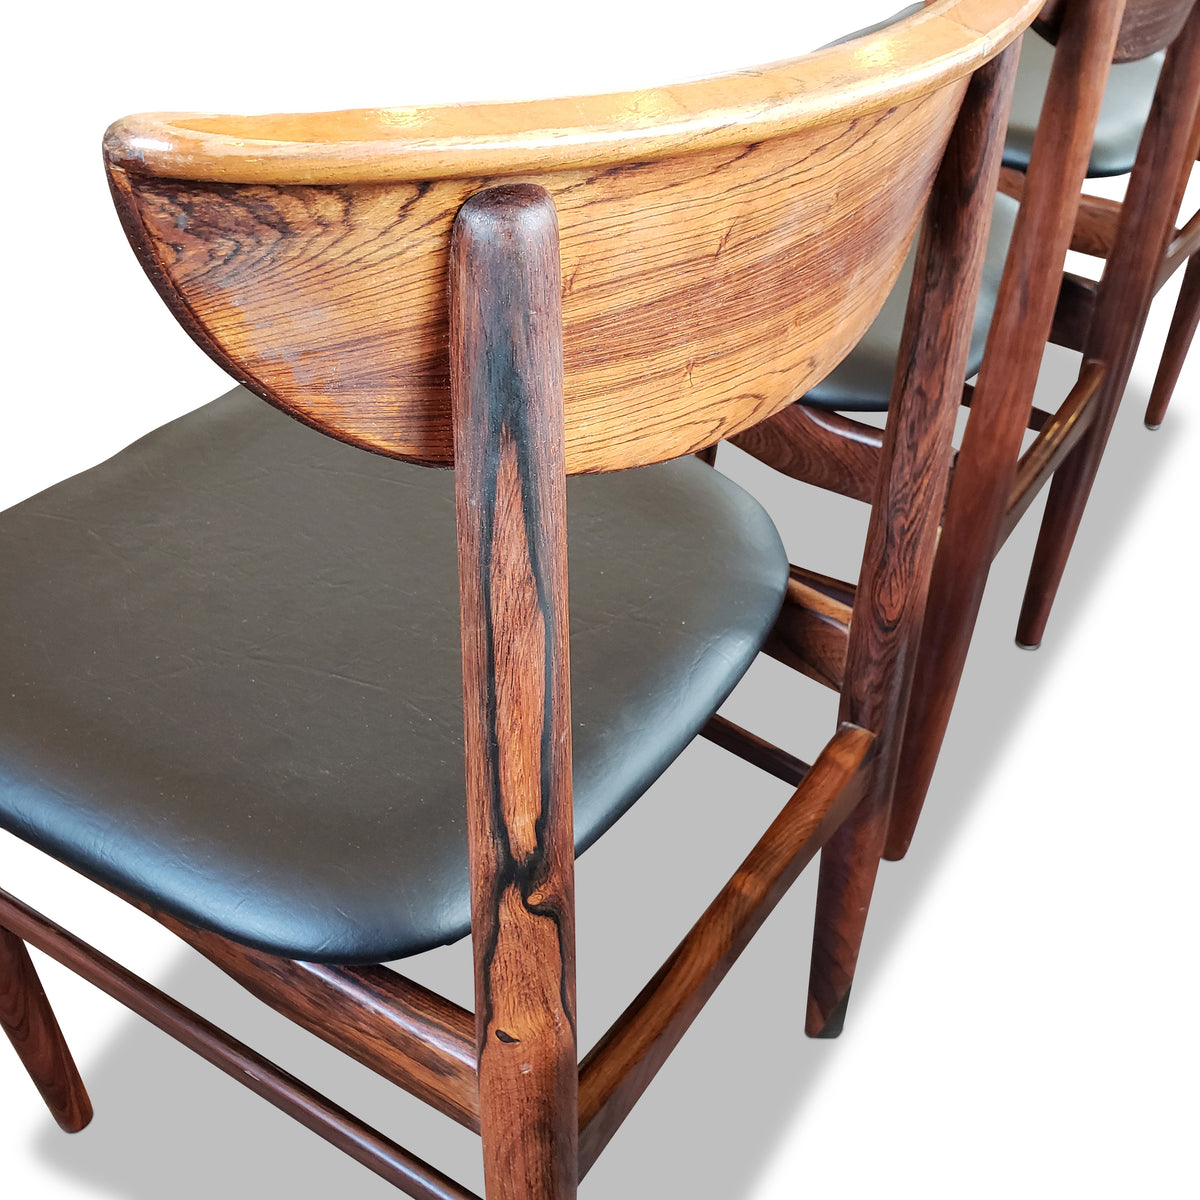 Brazilian Rosewood Dining Chairs by Dyrlund